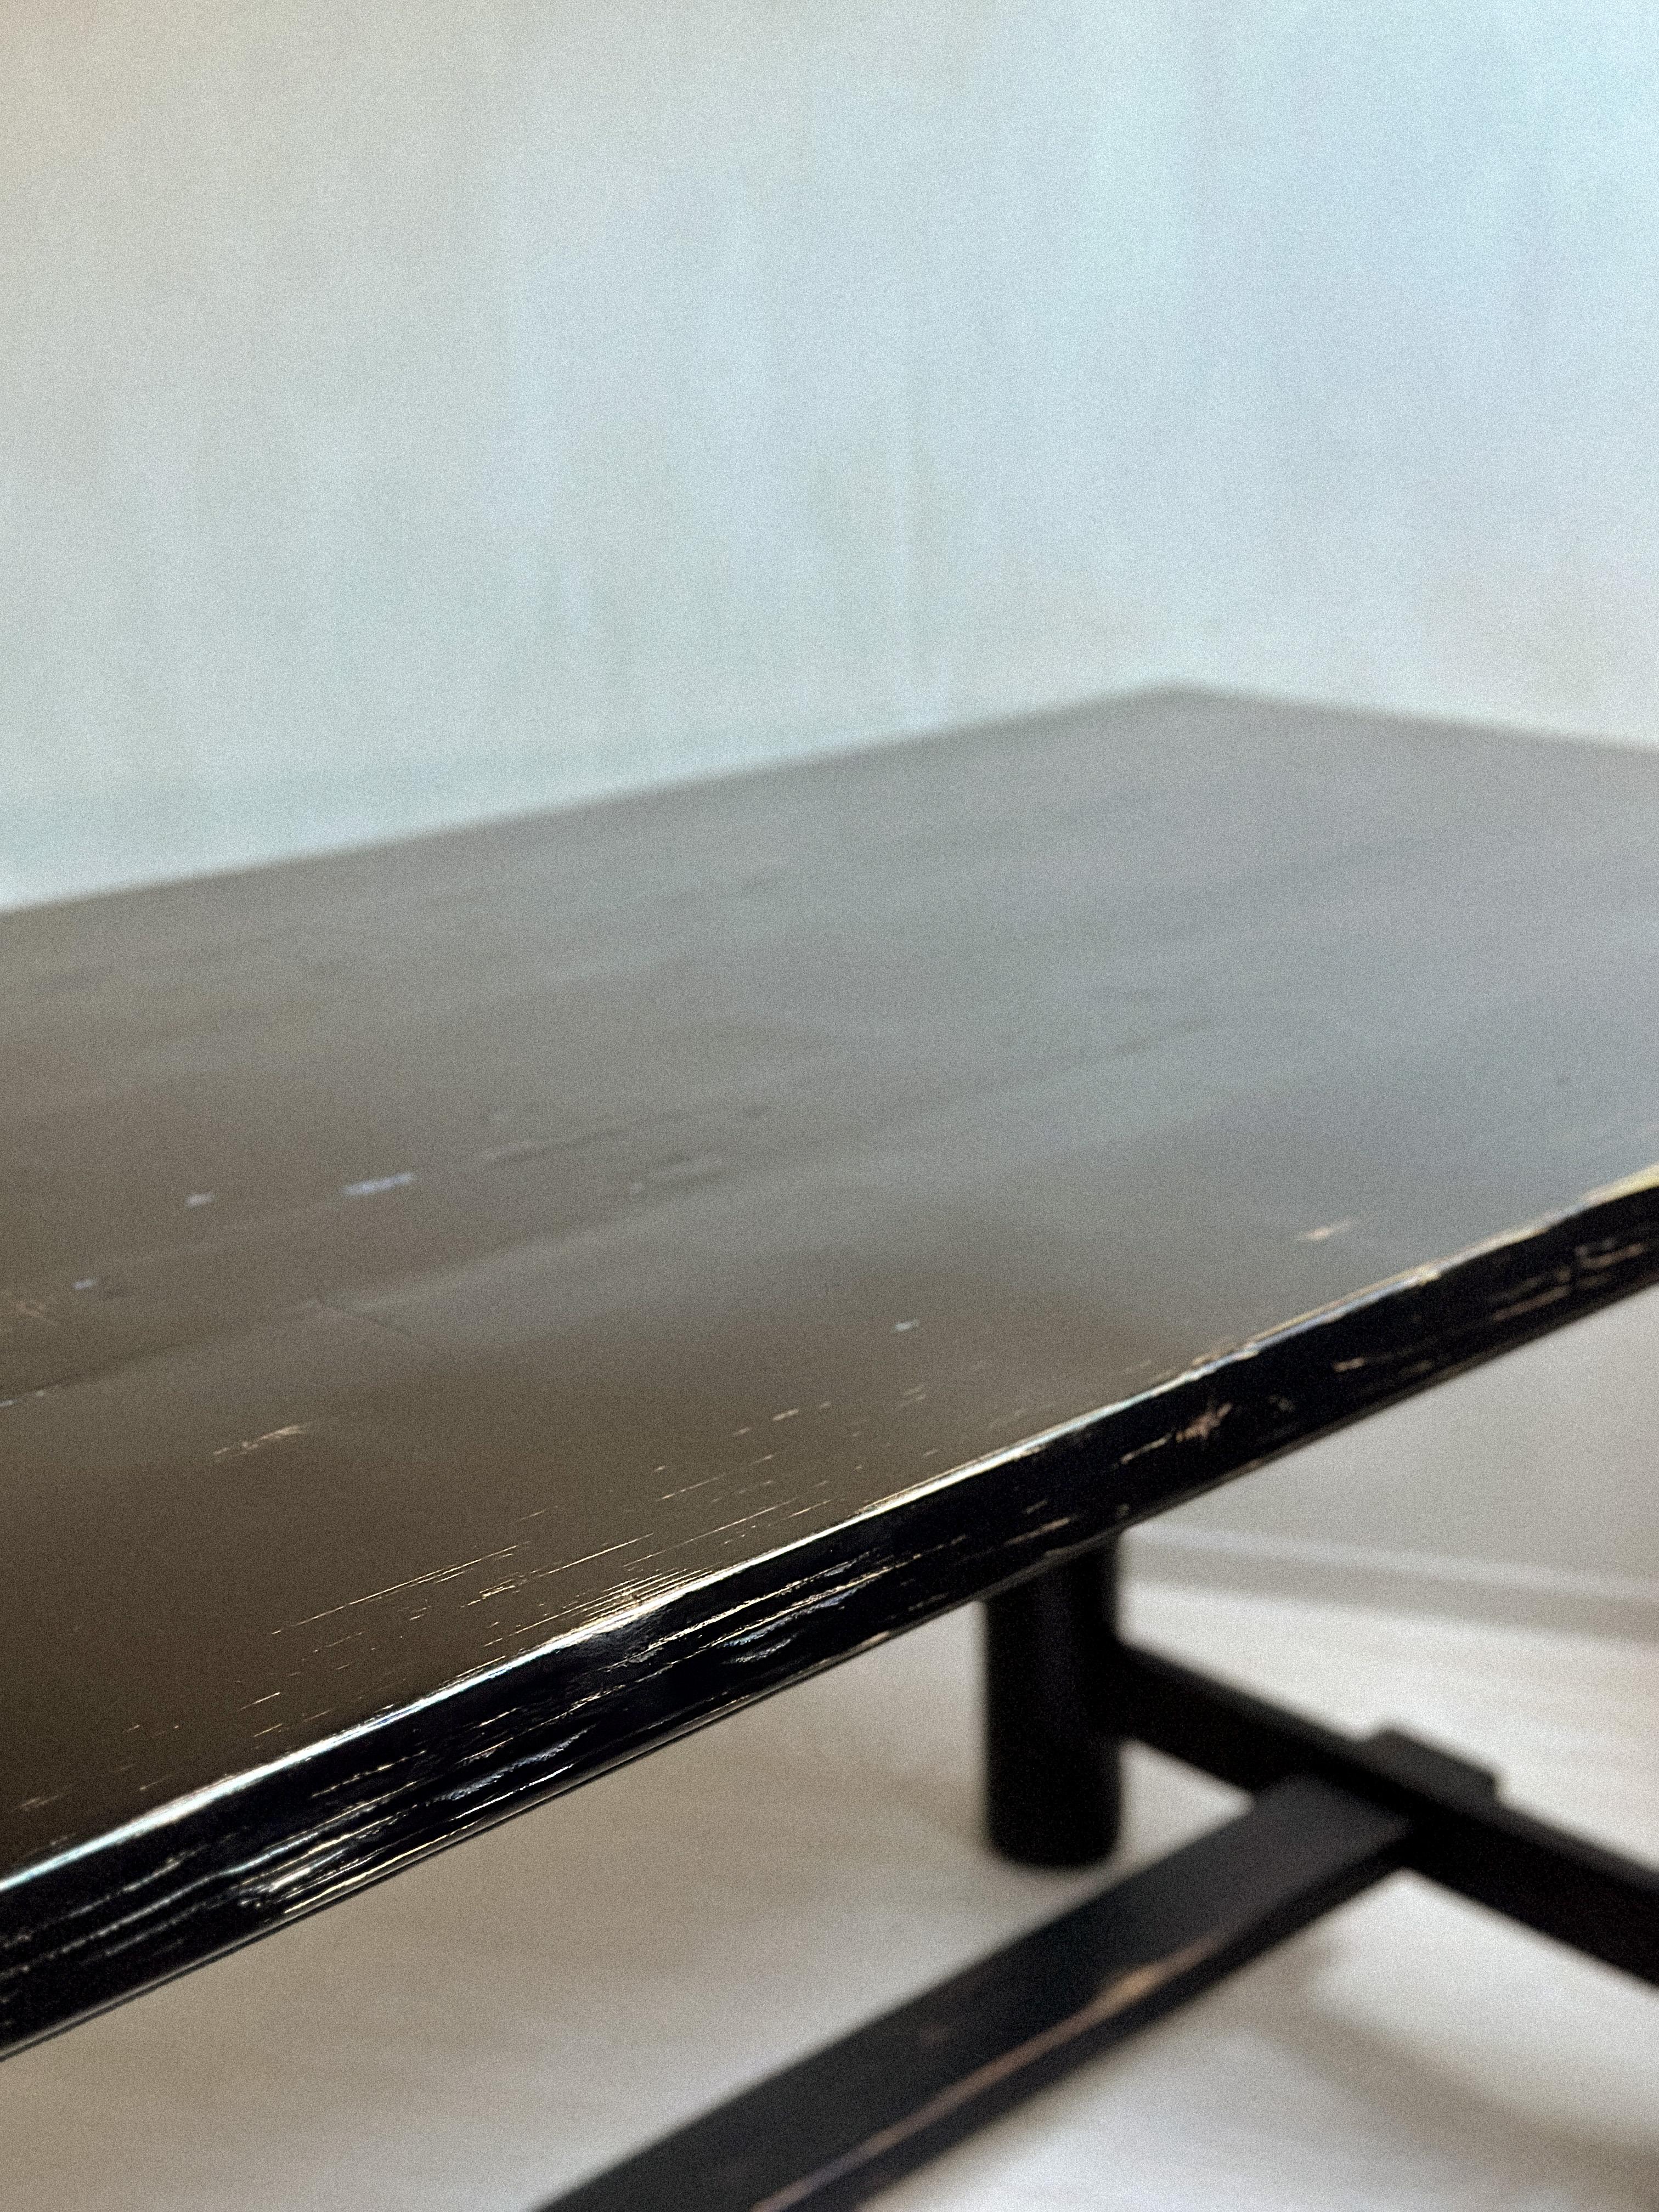 An Ebonized Meribel Dining Table, Wood, Charlotte Perriand (attr.), France 1959 In Good Condition For Sale In Hønefoss, 30